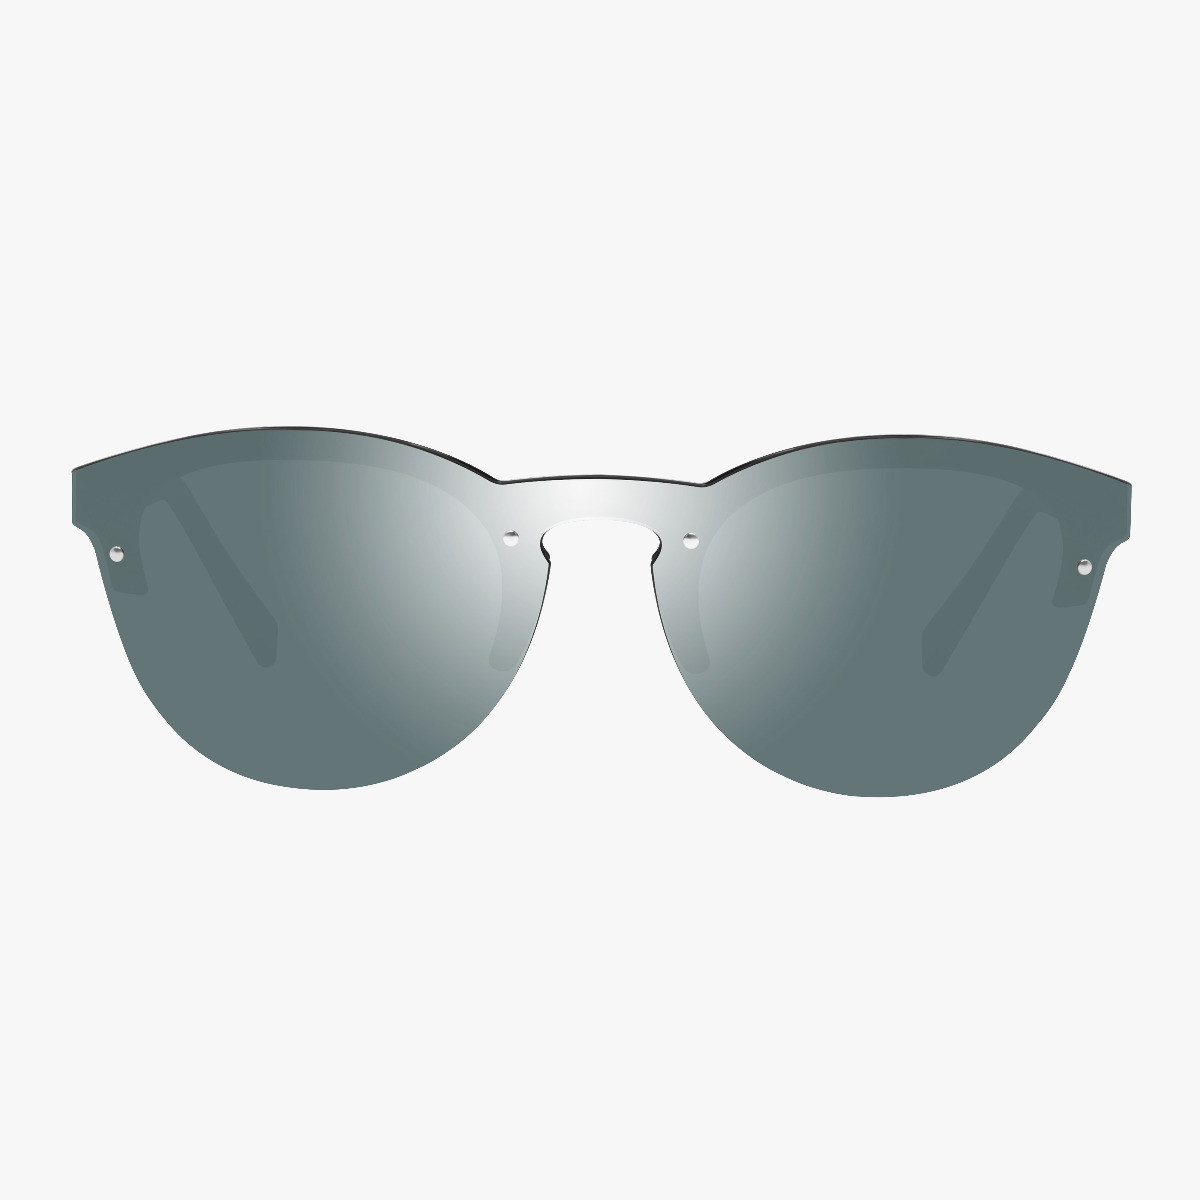 Scicon Sports | Protector Lifestyle Unisex Sunglasses - Black Frame, Silver Lens - EY170802